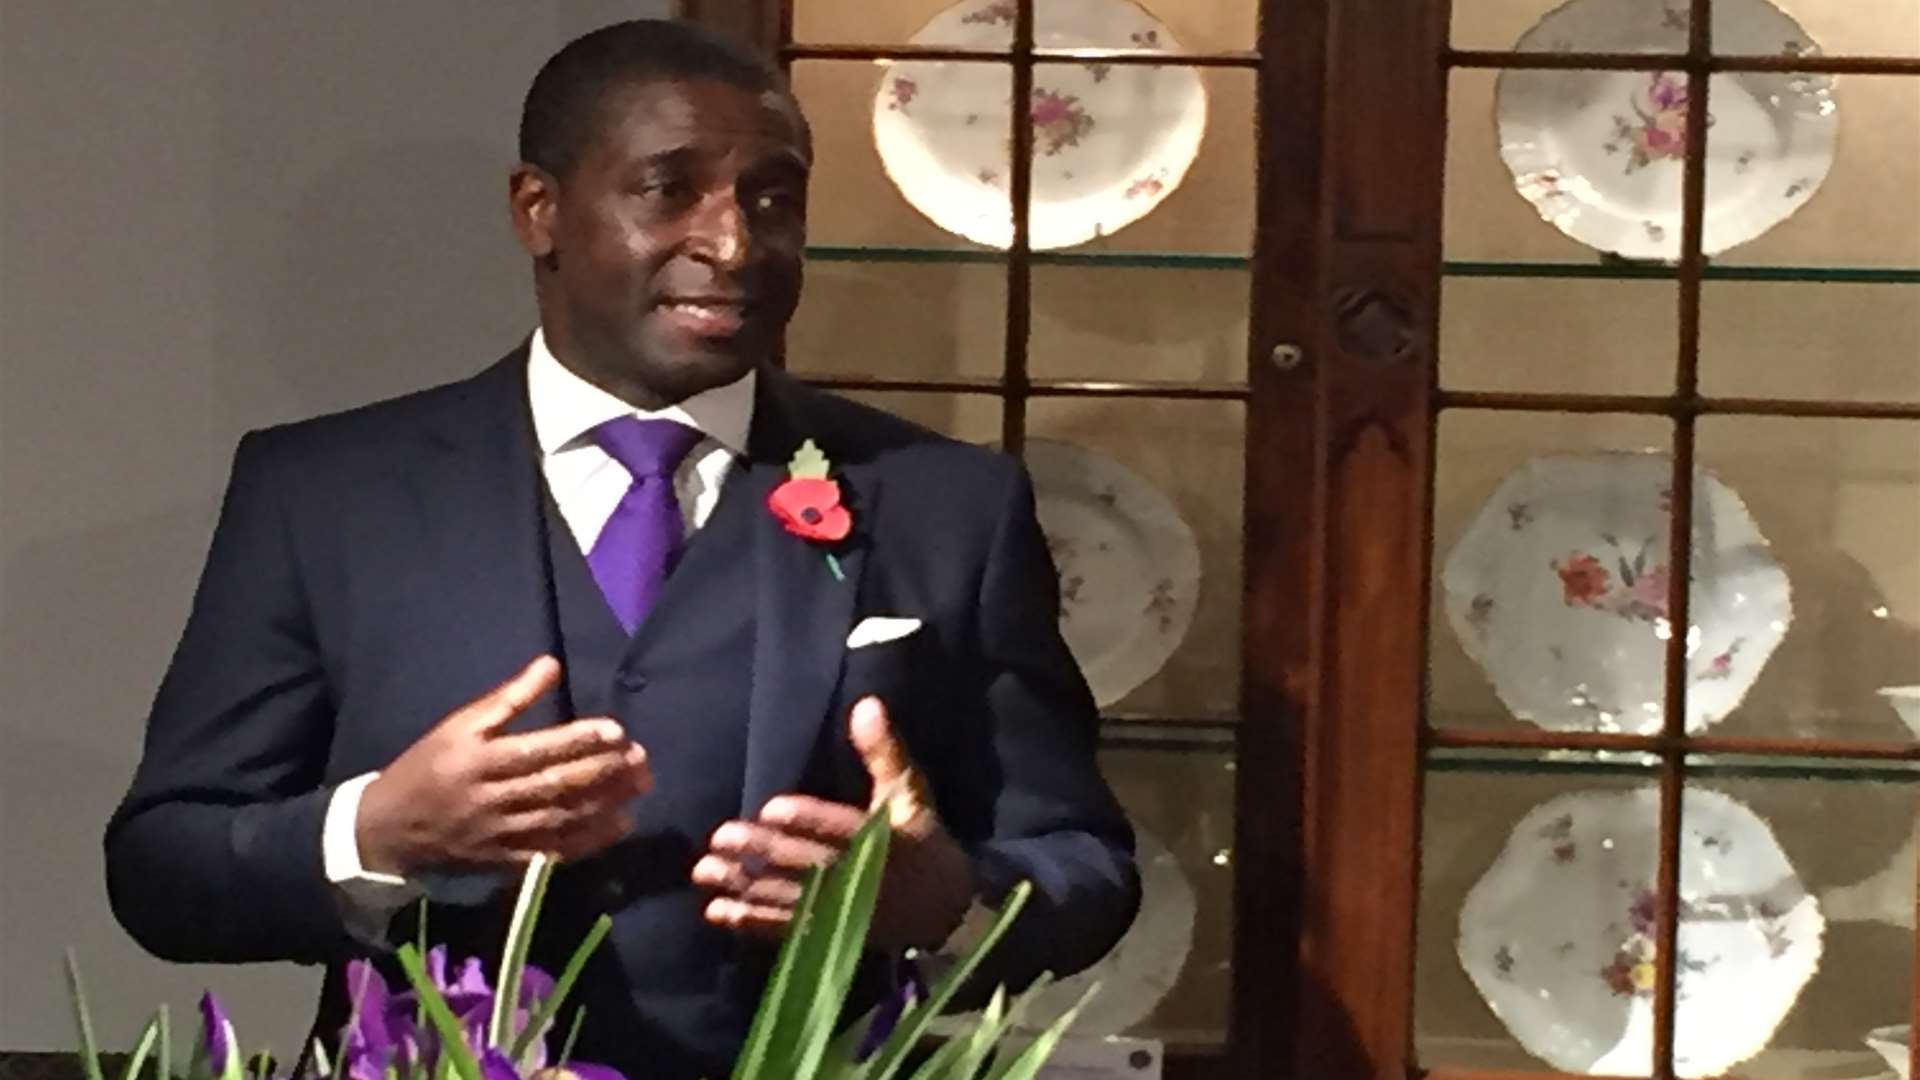 Lennox Cato speaks at an open evening at his shop in Edenbridge